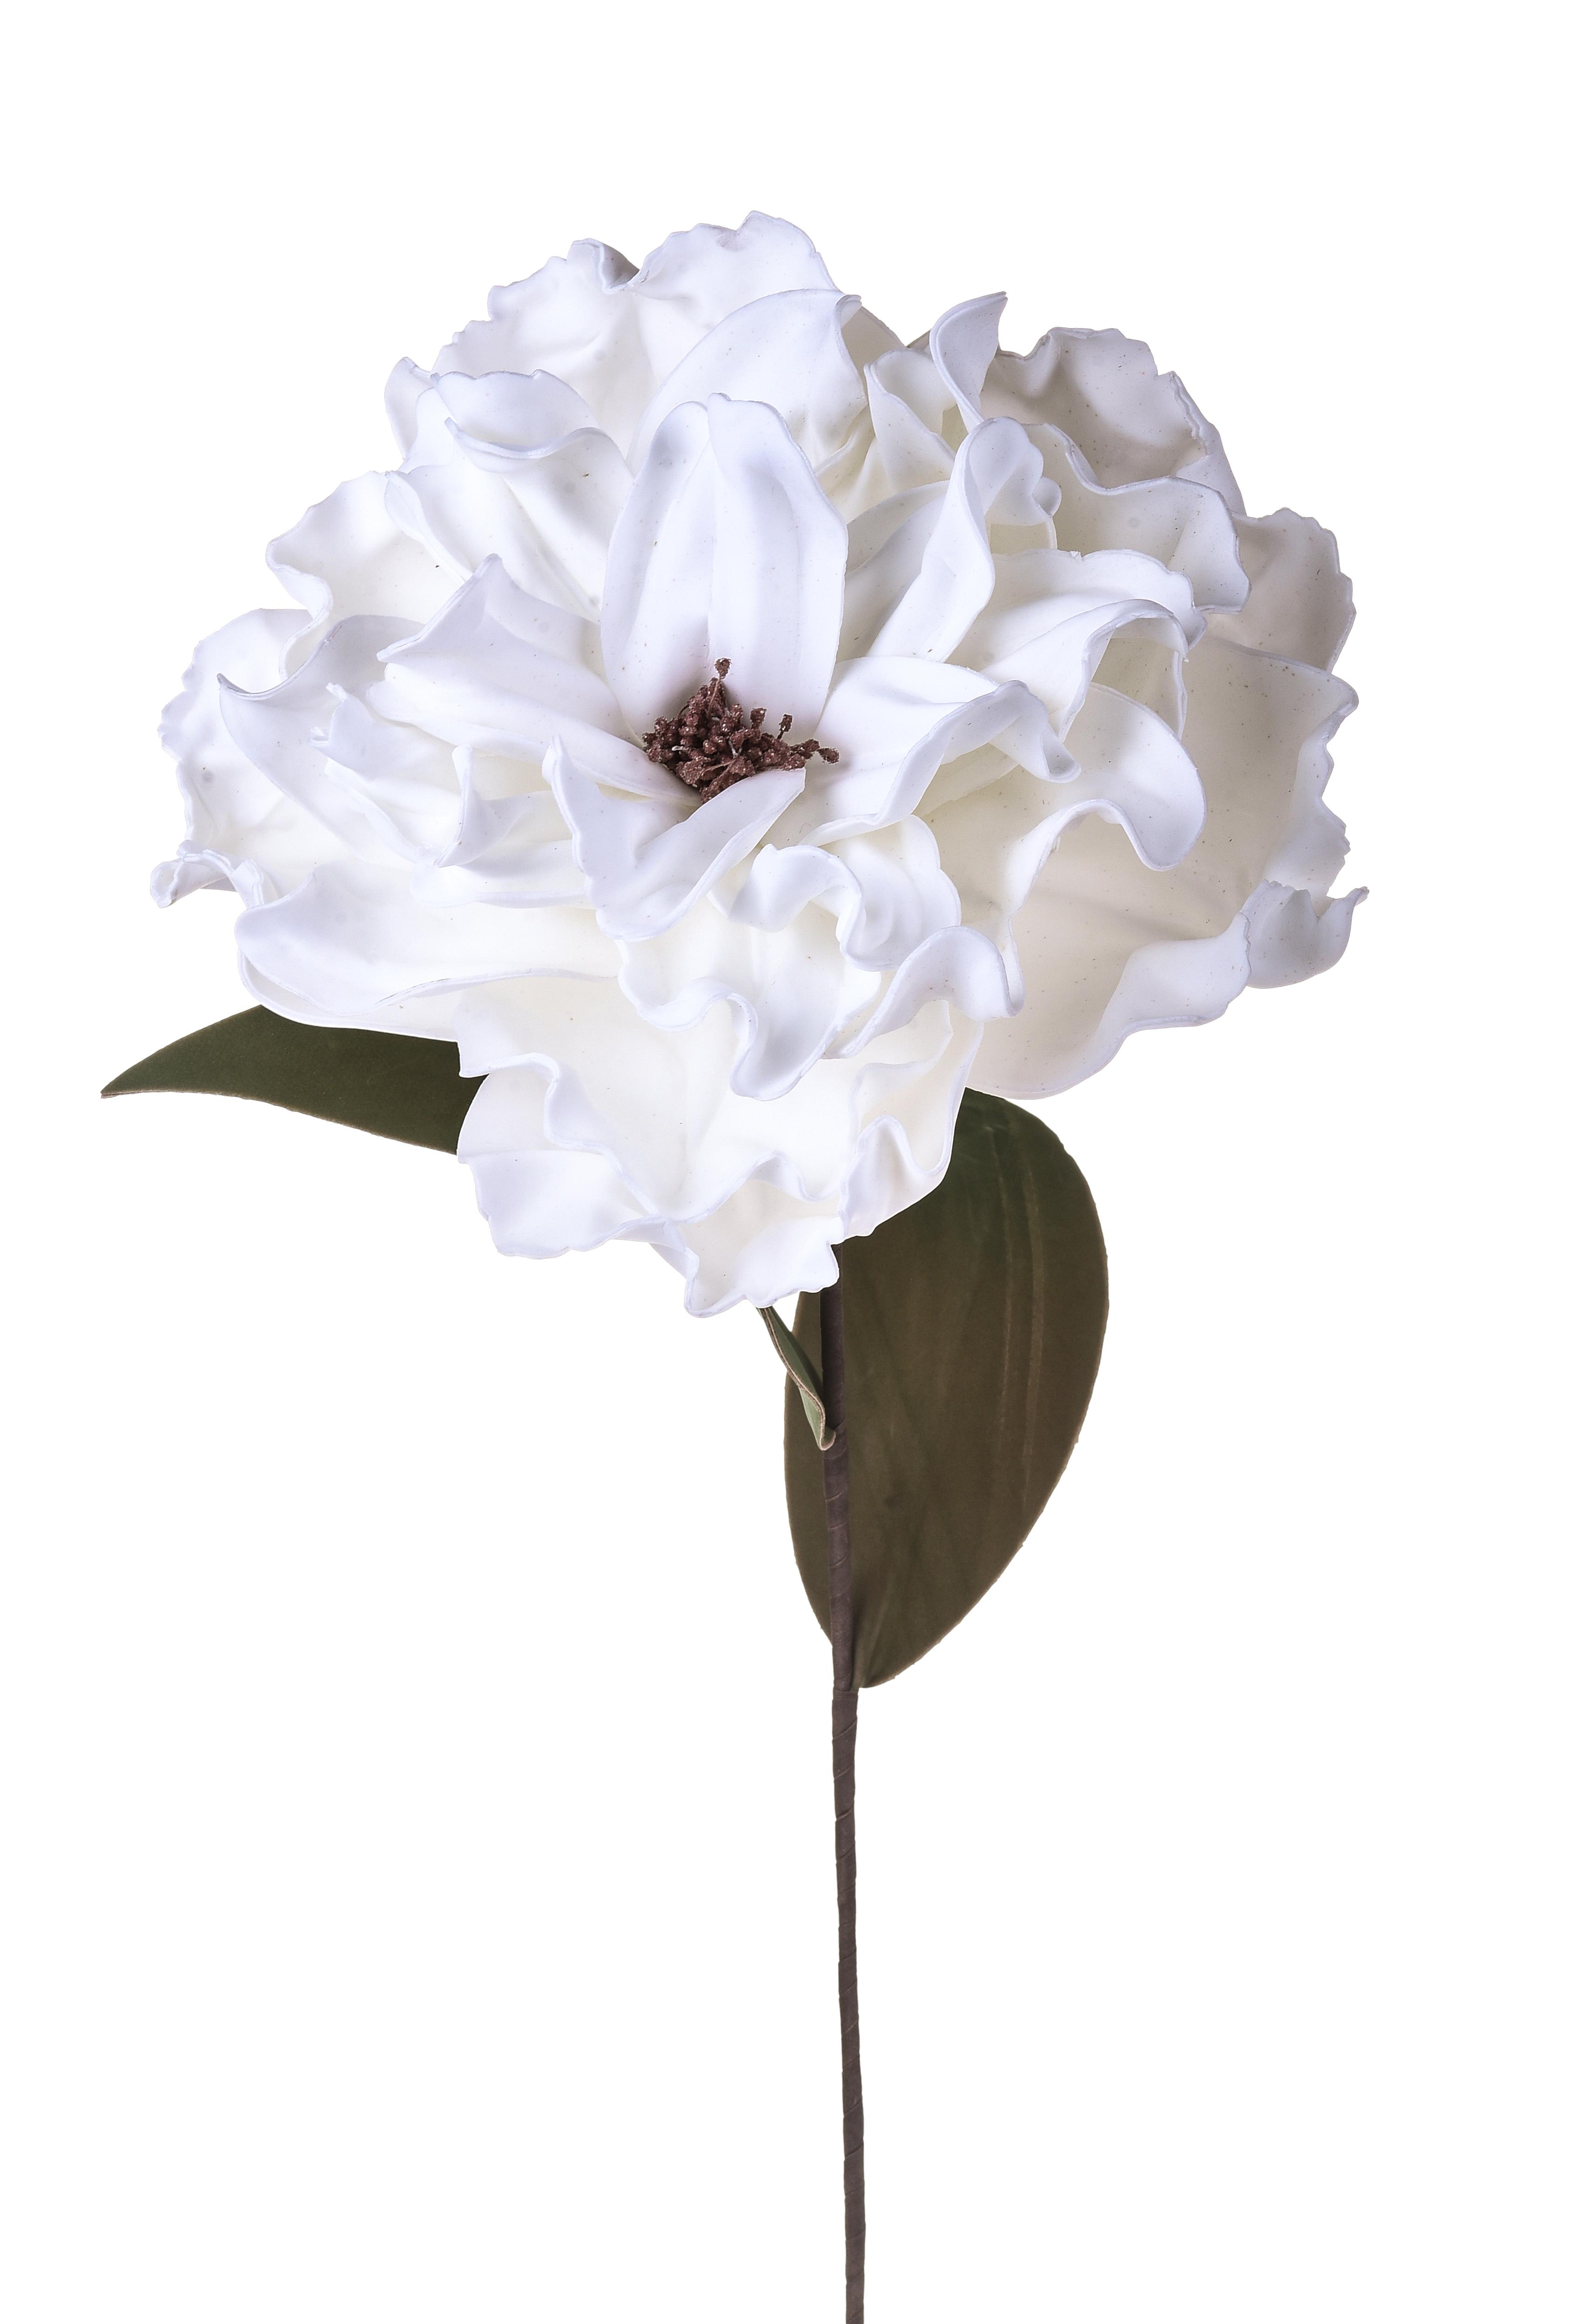 Home decors and accessories,GIFT ITEMS, INTERIORS ACCESSORIES,PEONIA 74 CM